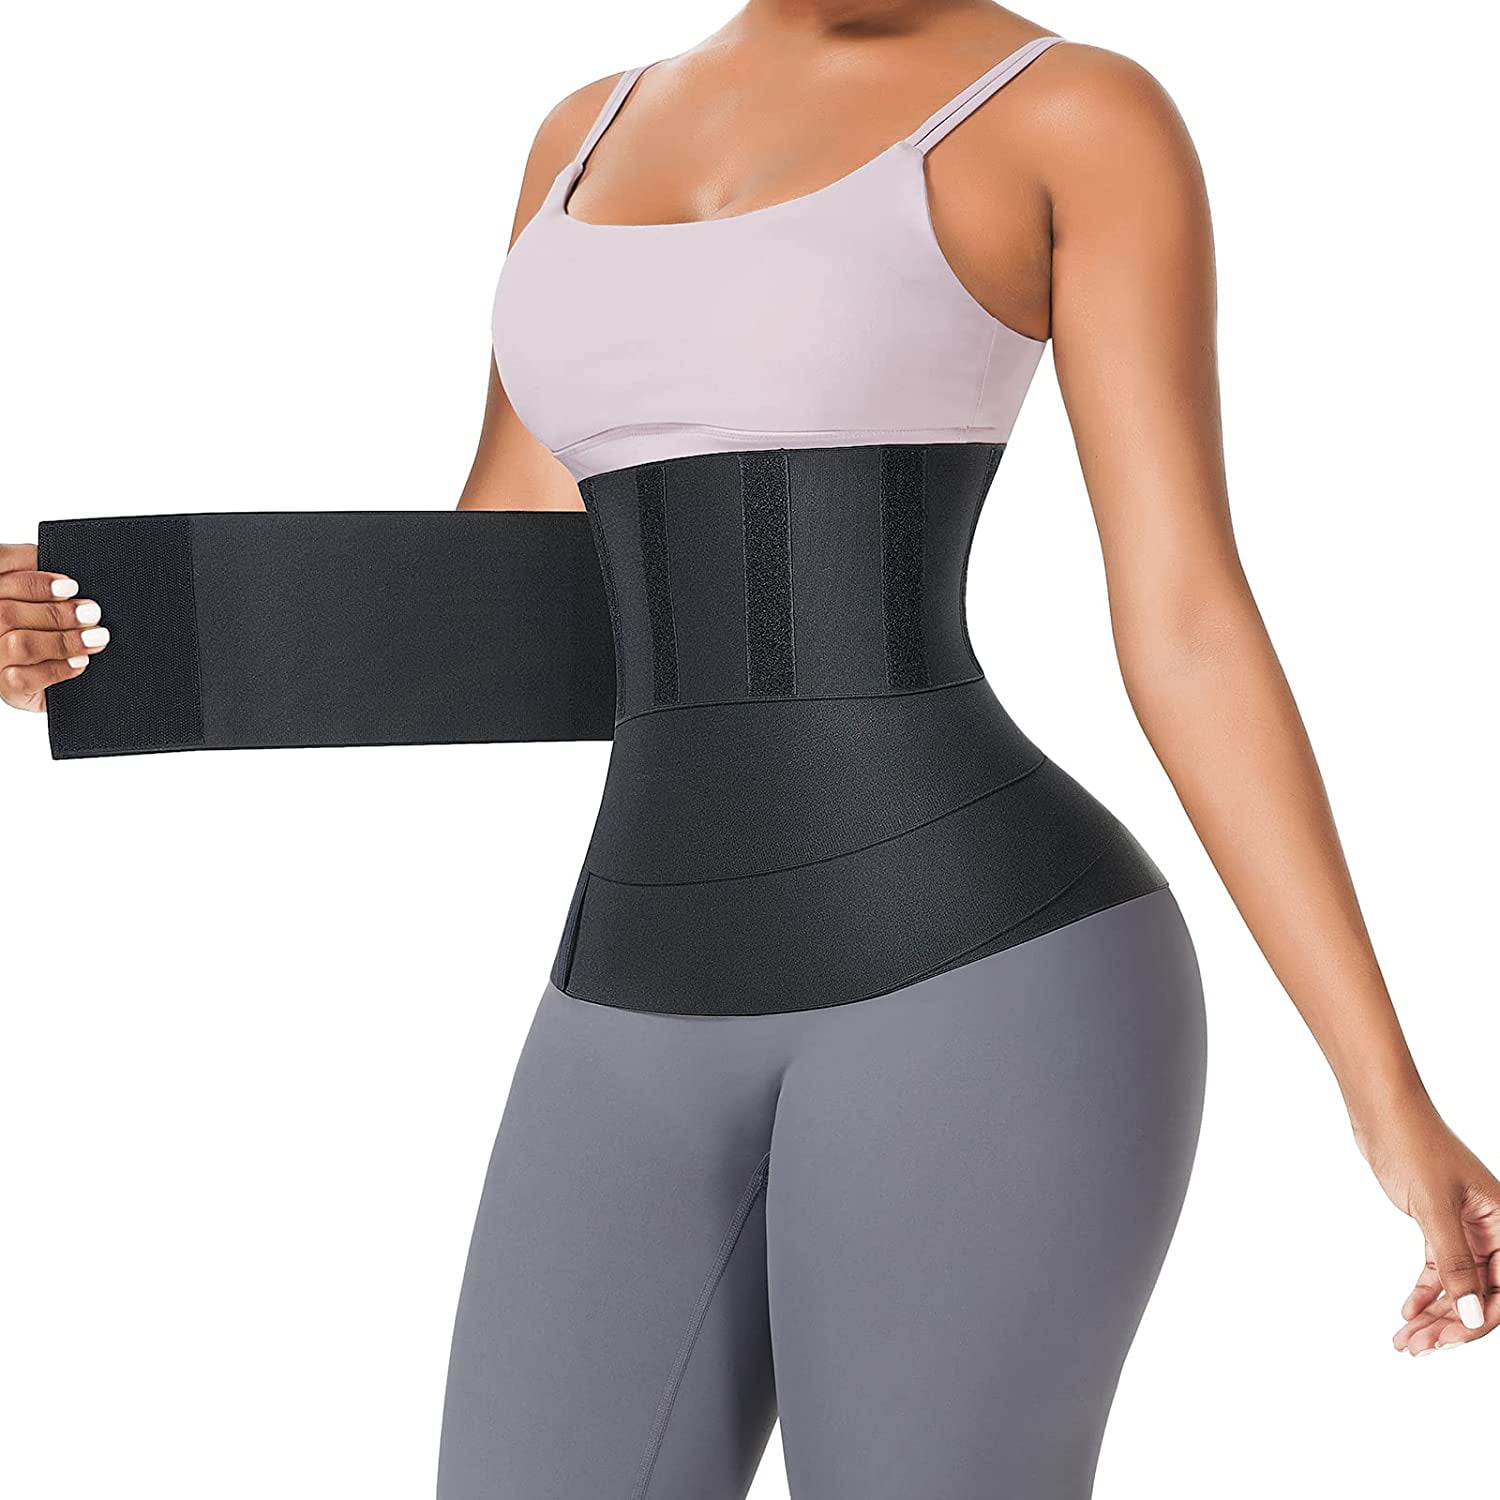 Snatch Me Up Bandage Wrap Waist Trainer for Women Tummy Wrap Sweat Waist Wraps for Stomach Trimmer Belt Adjust Your Snatch Waist Trimmer Belly Body Shaper Compression Wrap for Women Lower Belly Fat Plus Size Weight Loss 